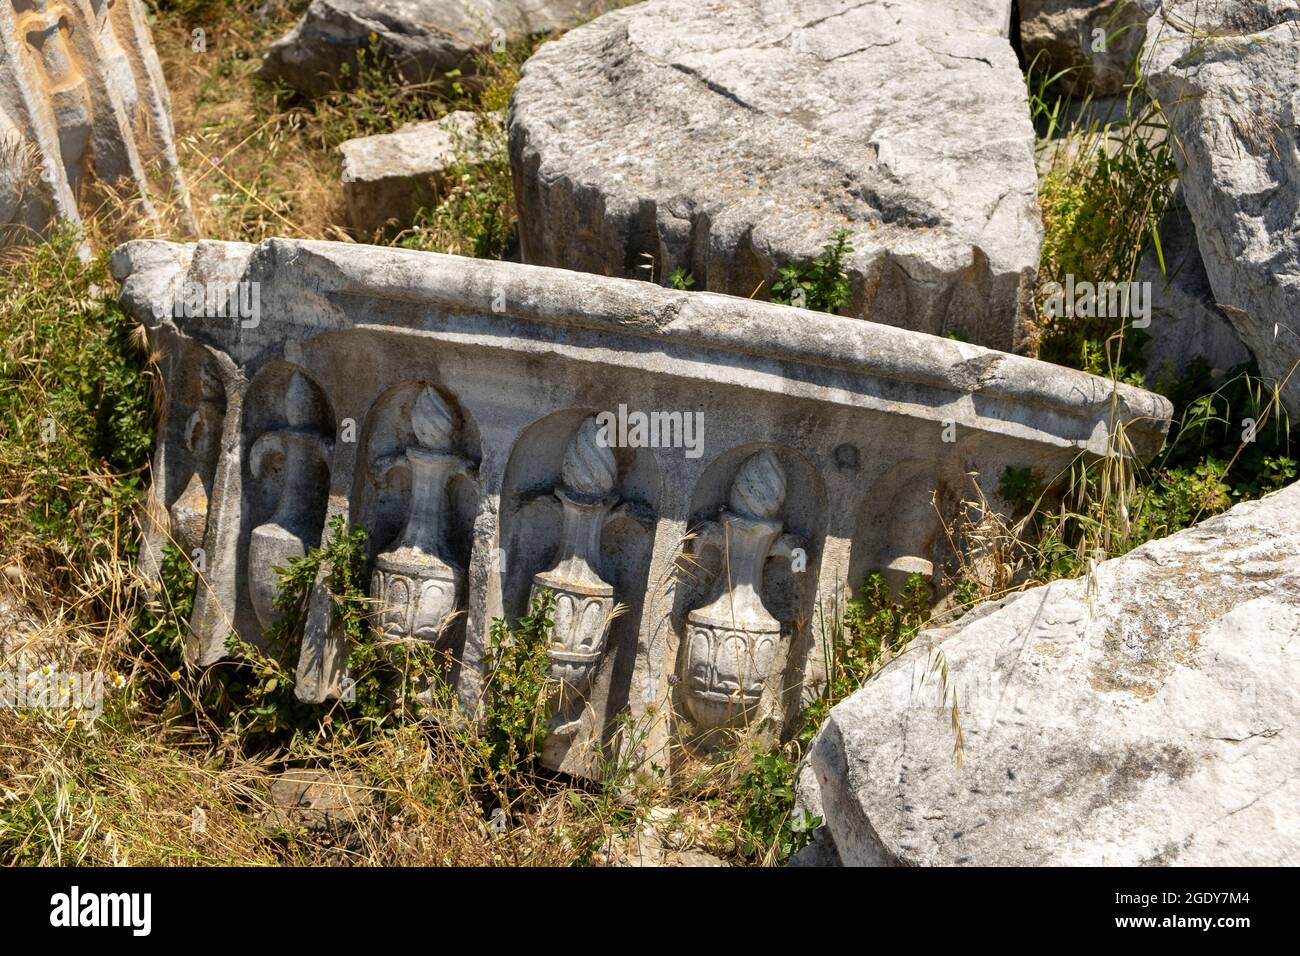 During excavations at the Temple of Kyzikos Hadrian in the northwestern province of Balikesir's Erdek district, the world's biggest Corinthian-style c Stock Photo